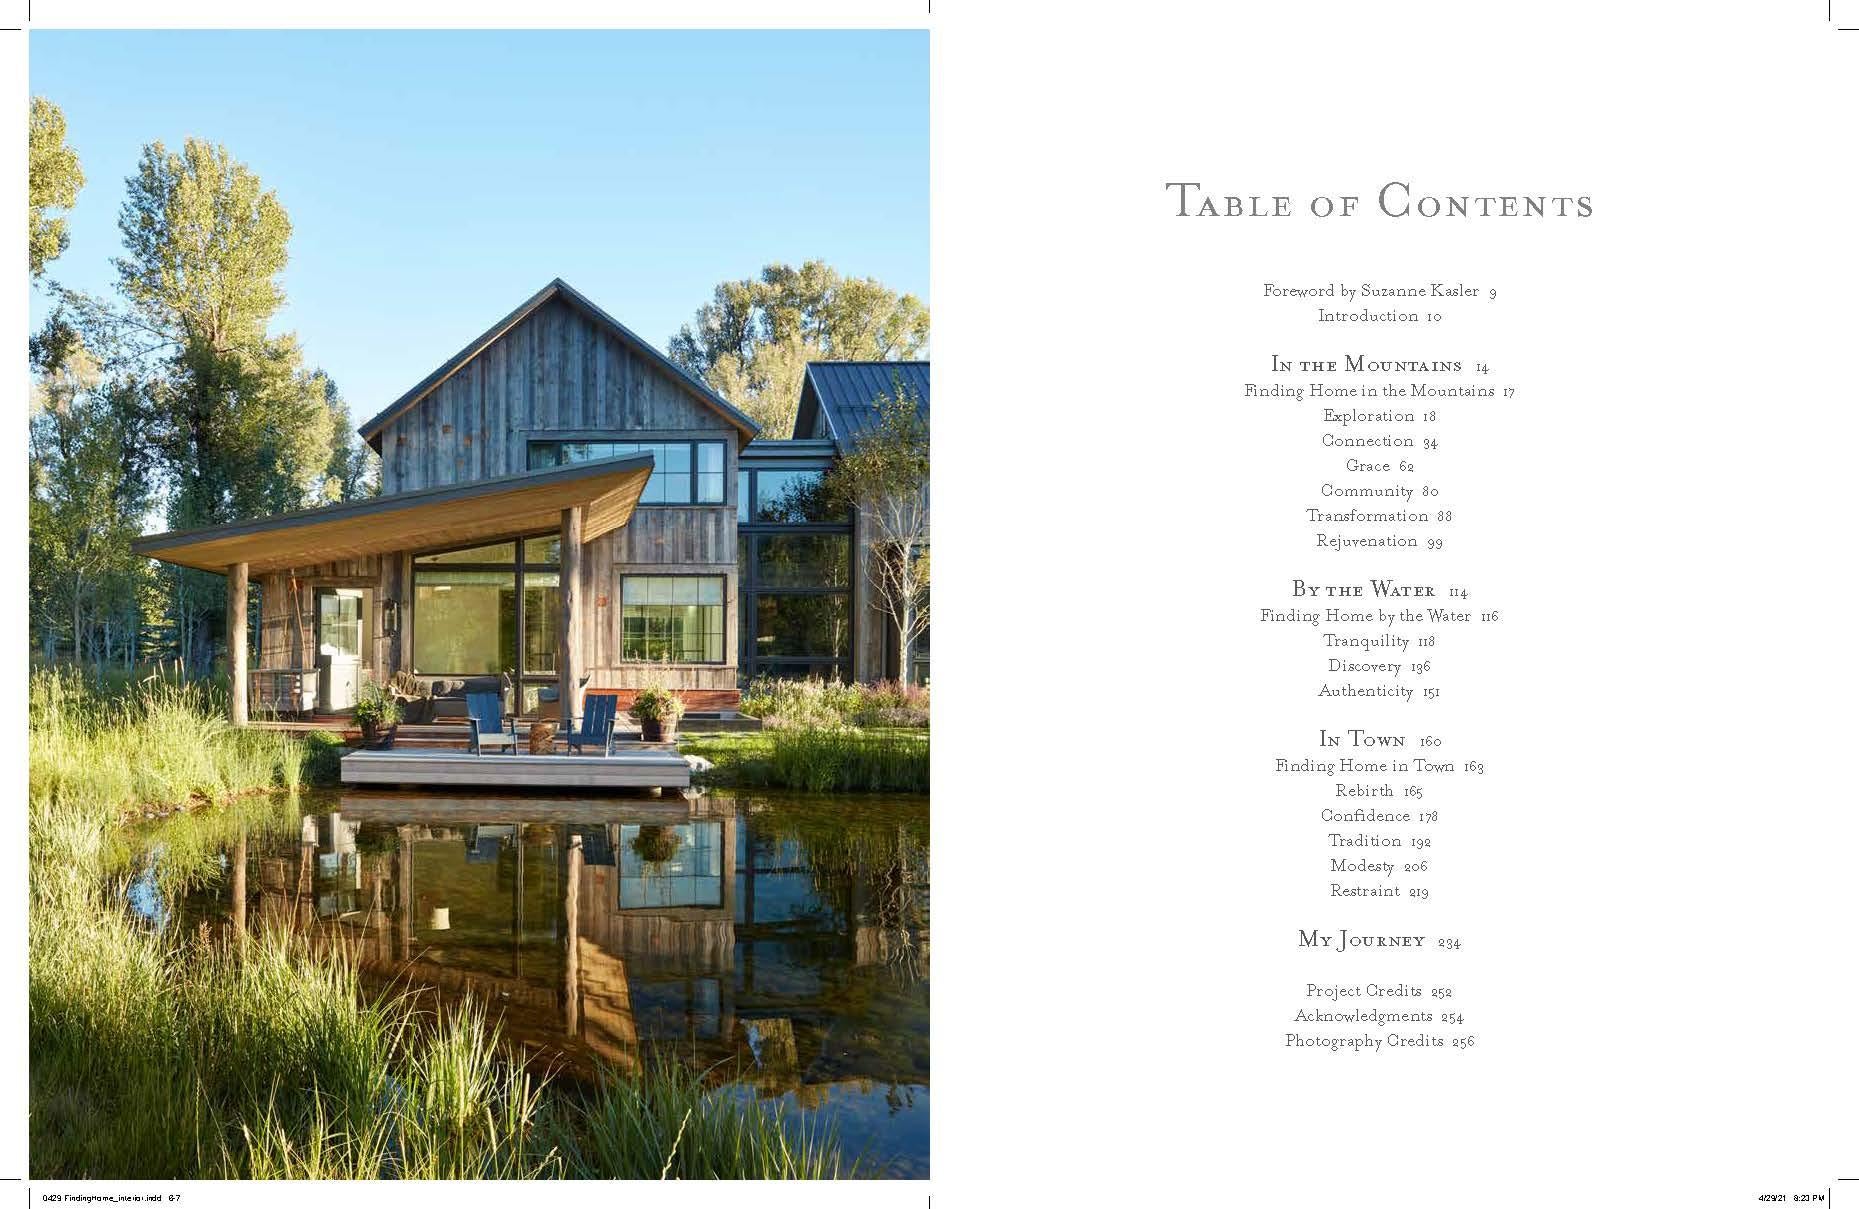 Author Ken Pursley and Jacqueline Terrebonne, Foreword by Suzanne Kasler
In their first book, acclaimed architects Ken Pursley and Craig Dixon explore how to create gracious homes with welcoming entryways, soulful interiors, inviting porches, and